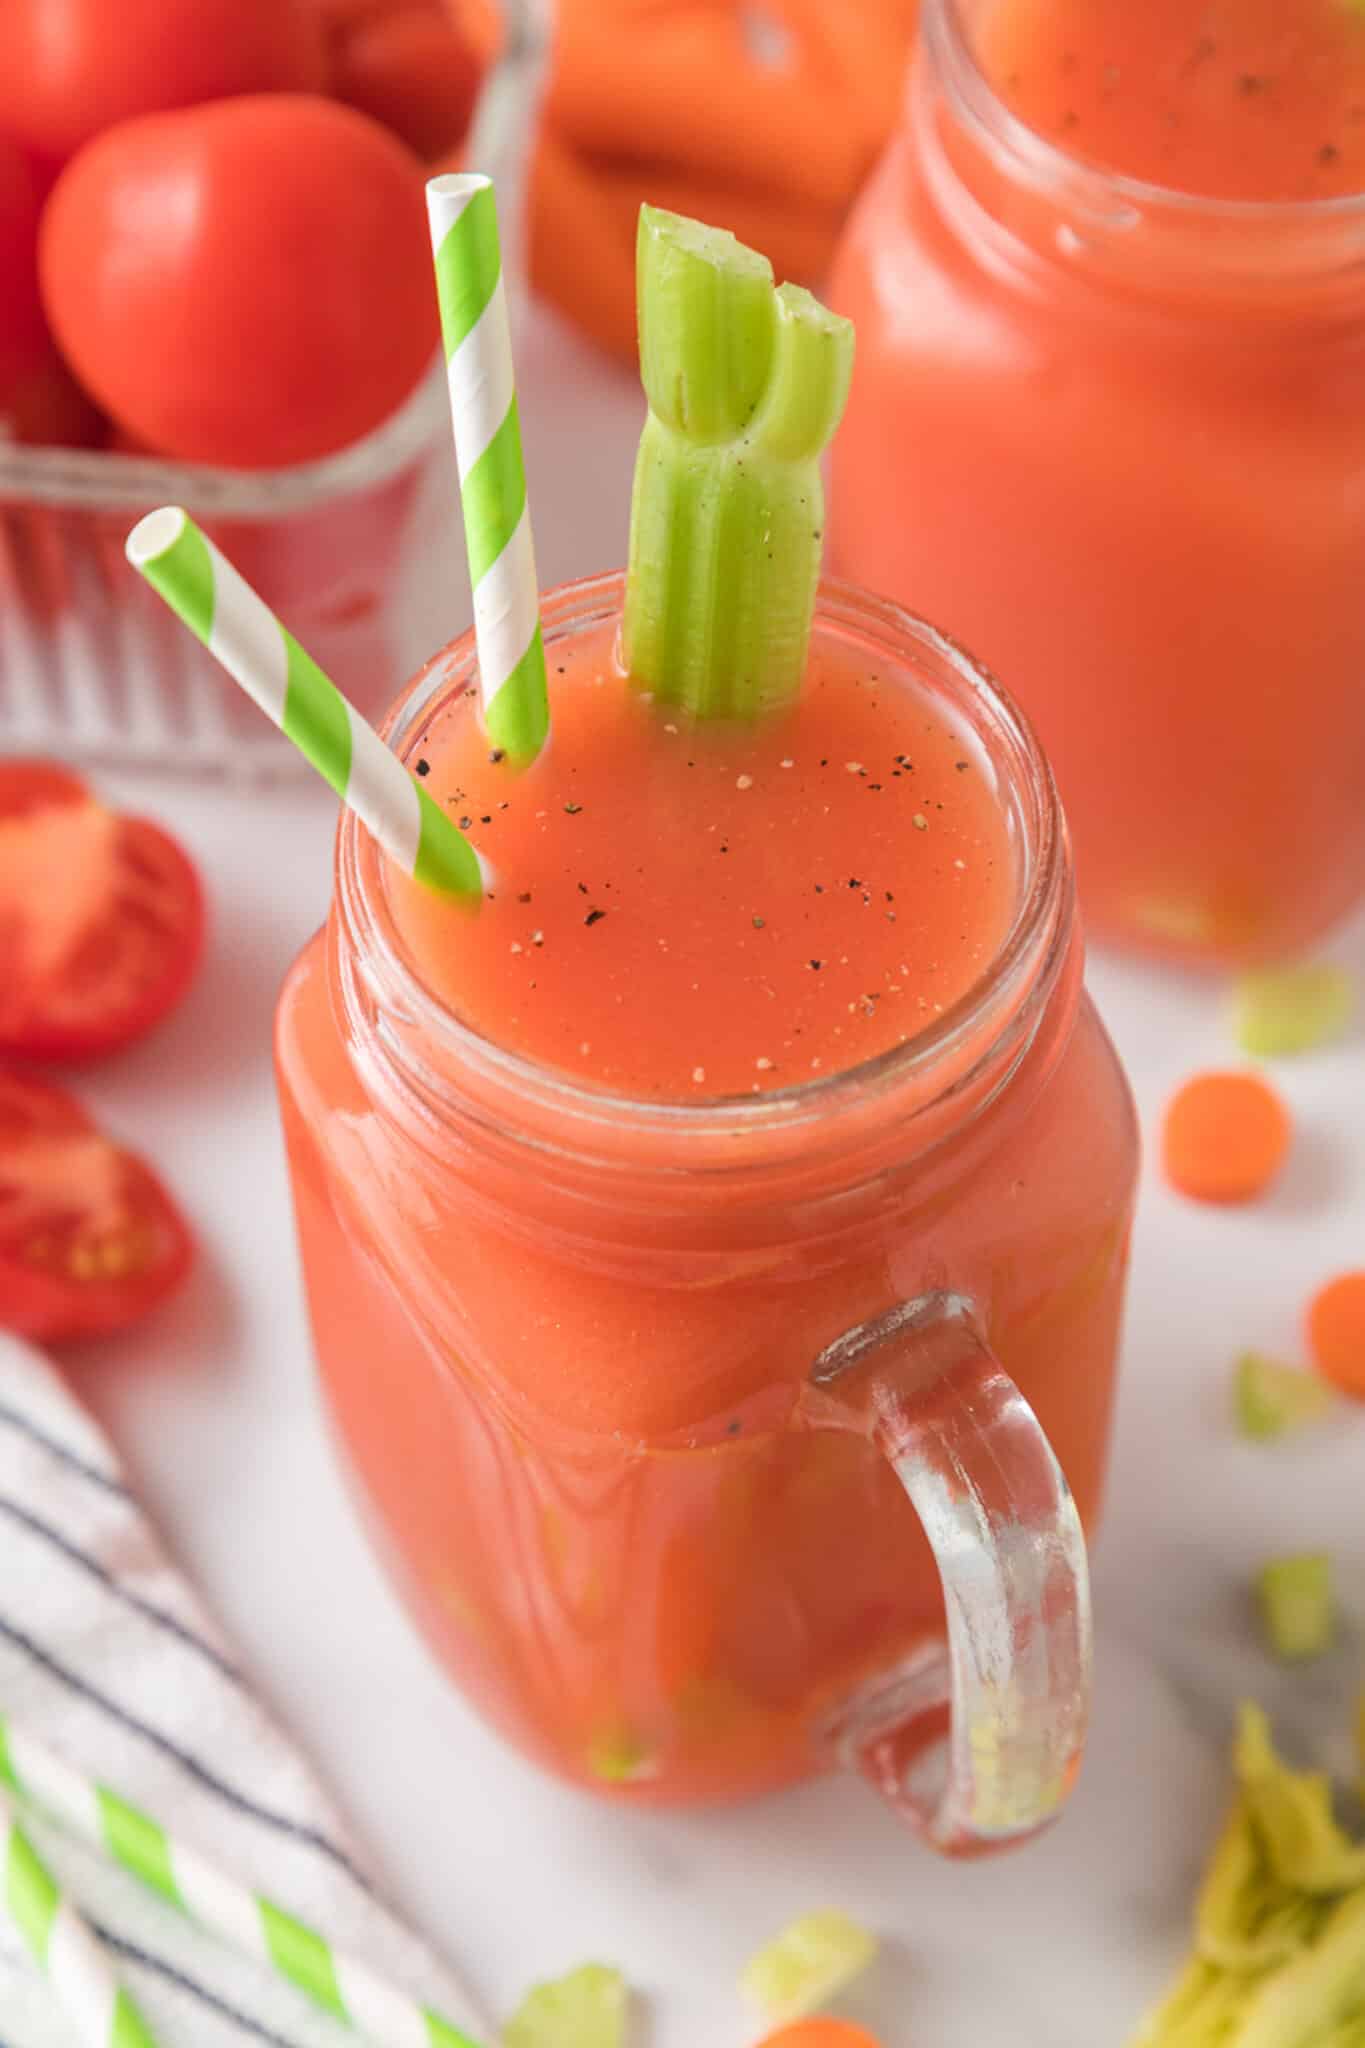 Large handled mason jar with tomato juice that has two straws and a celery stalk.